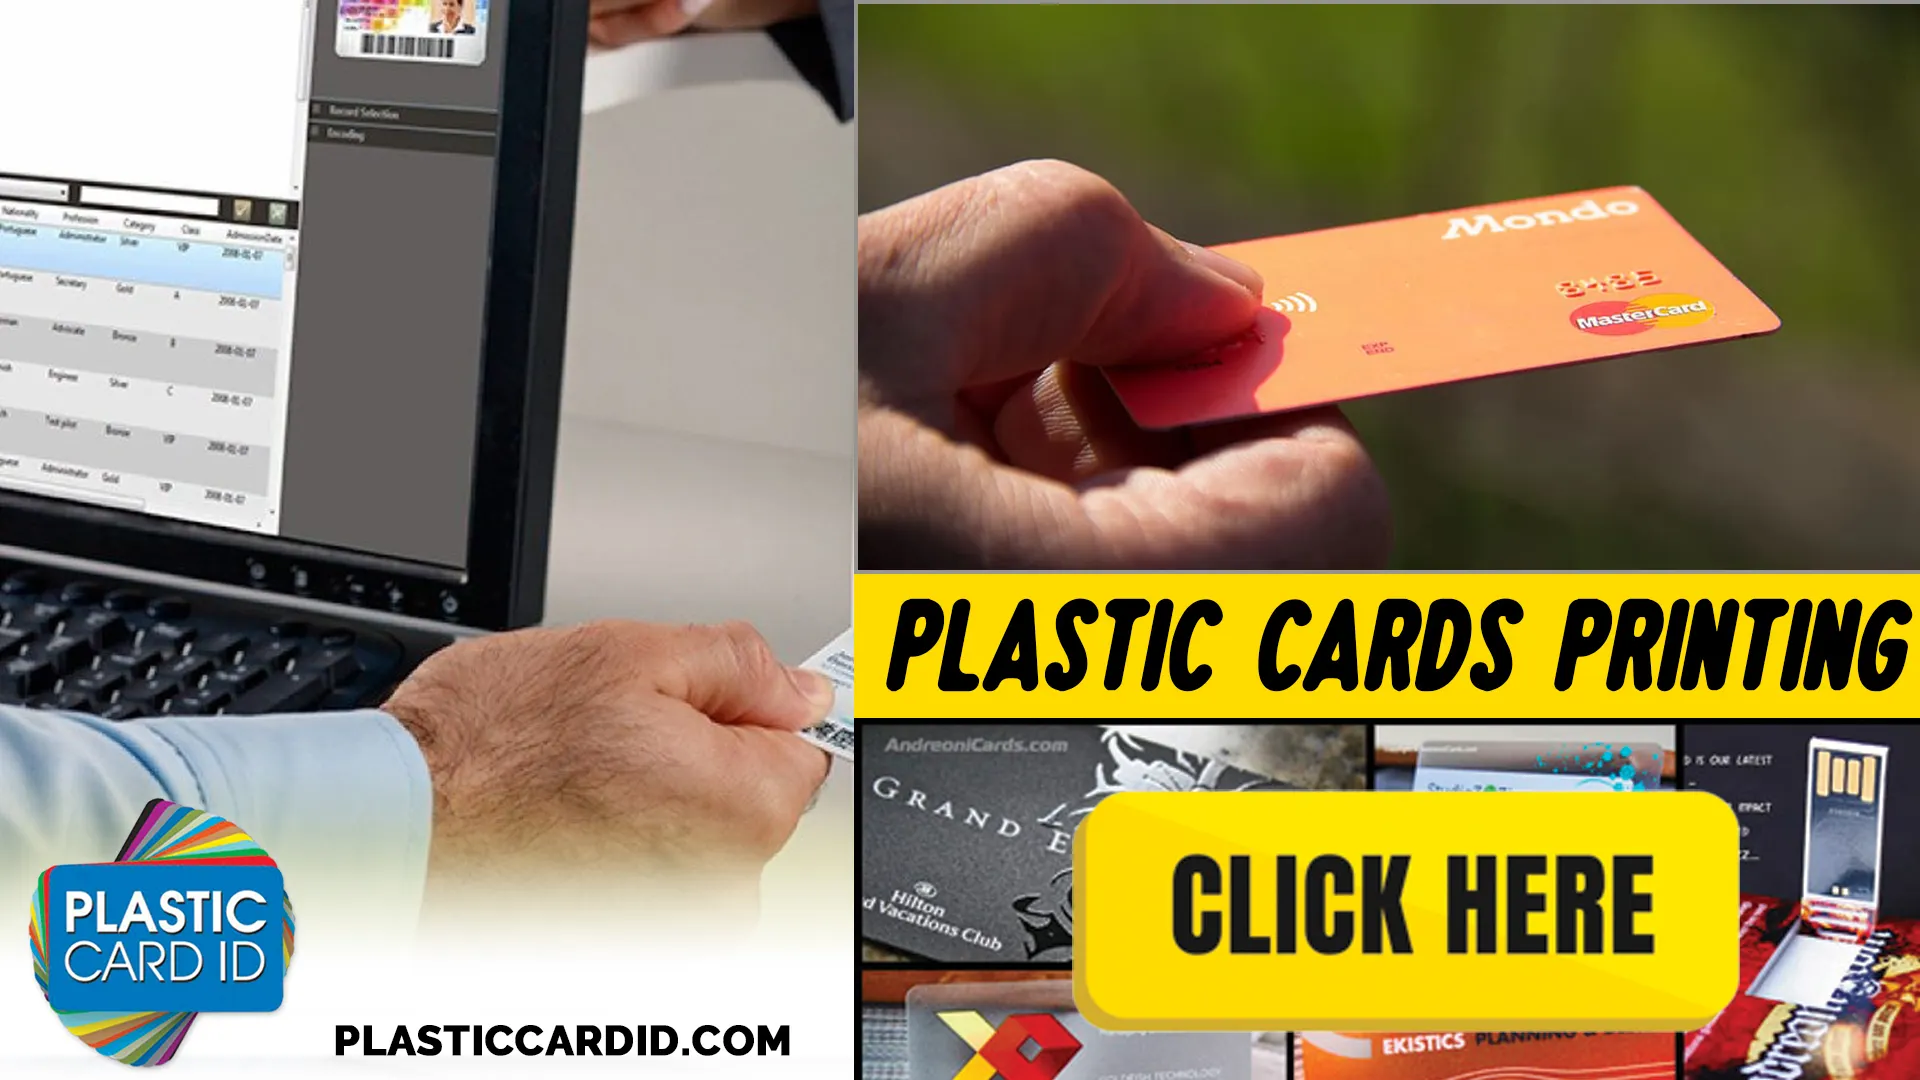 Breaking Down the Benefits of Card Printing with Plastic Card ID
